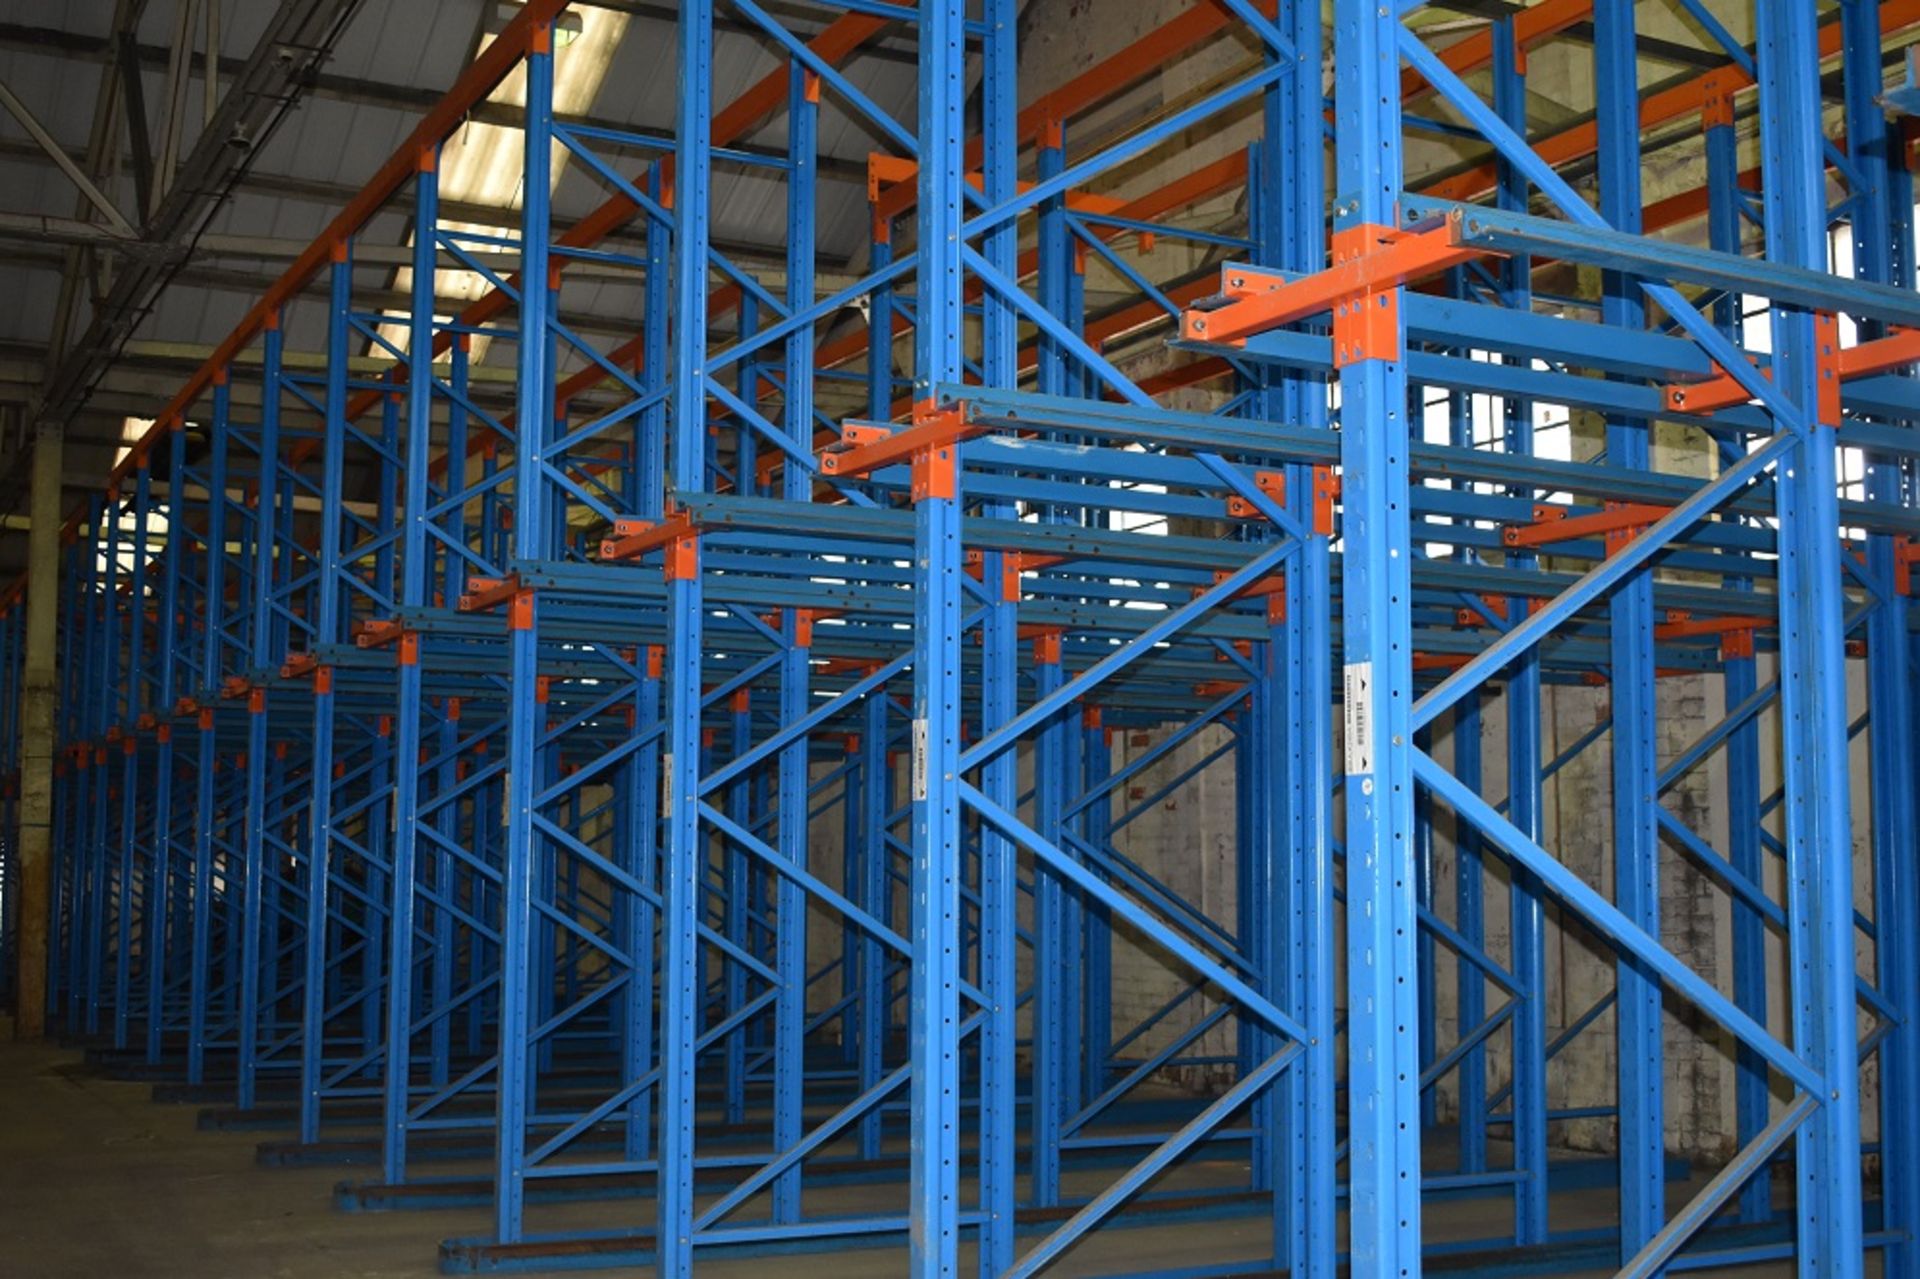 11 X BAYS OF 5 MTR HIGH DRIVE IN PALLET RACKING CONSISTING OF 66 BEAMS 34 X FRAMES - Image 2 of 2